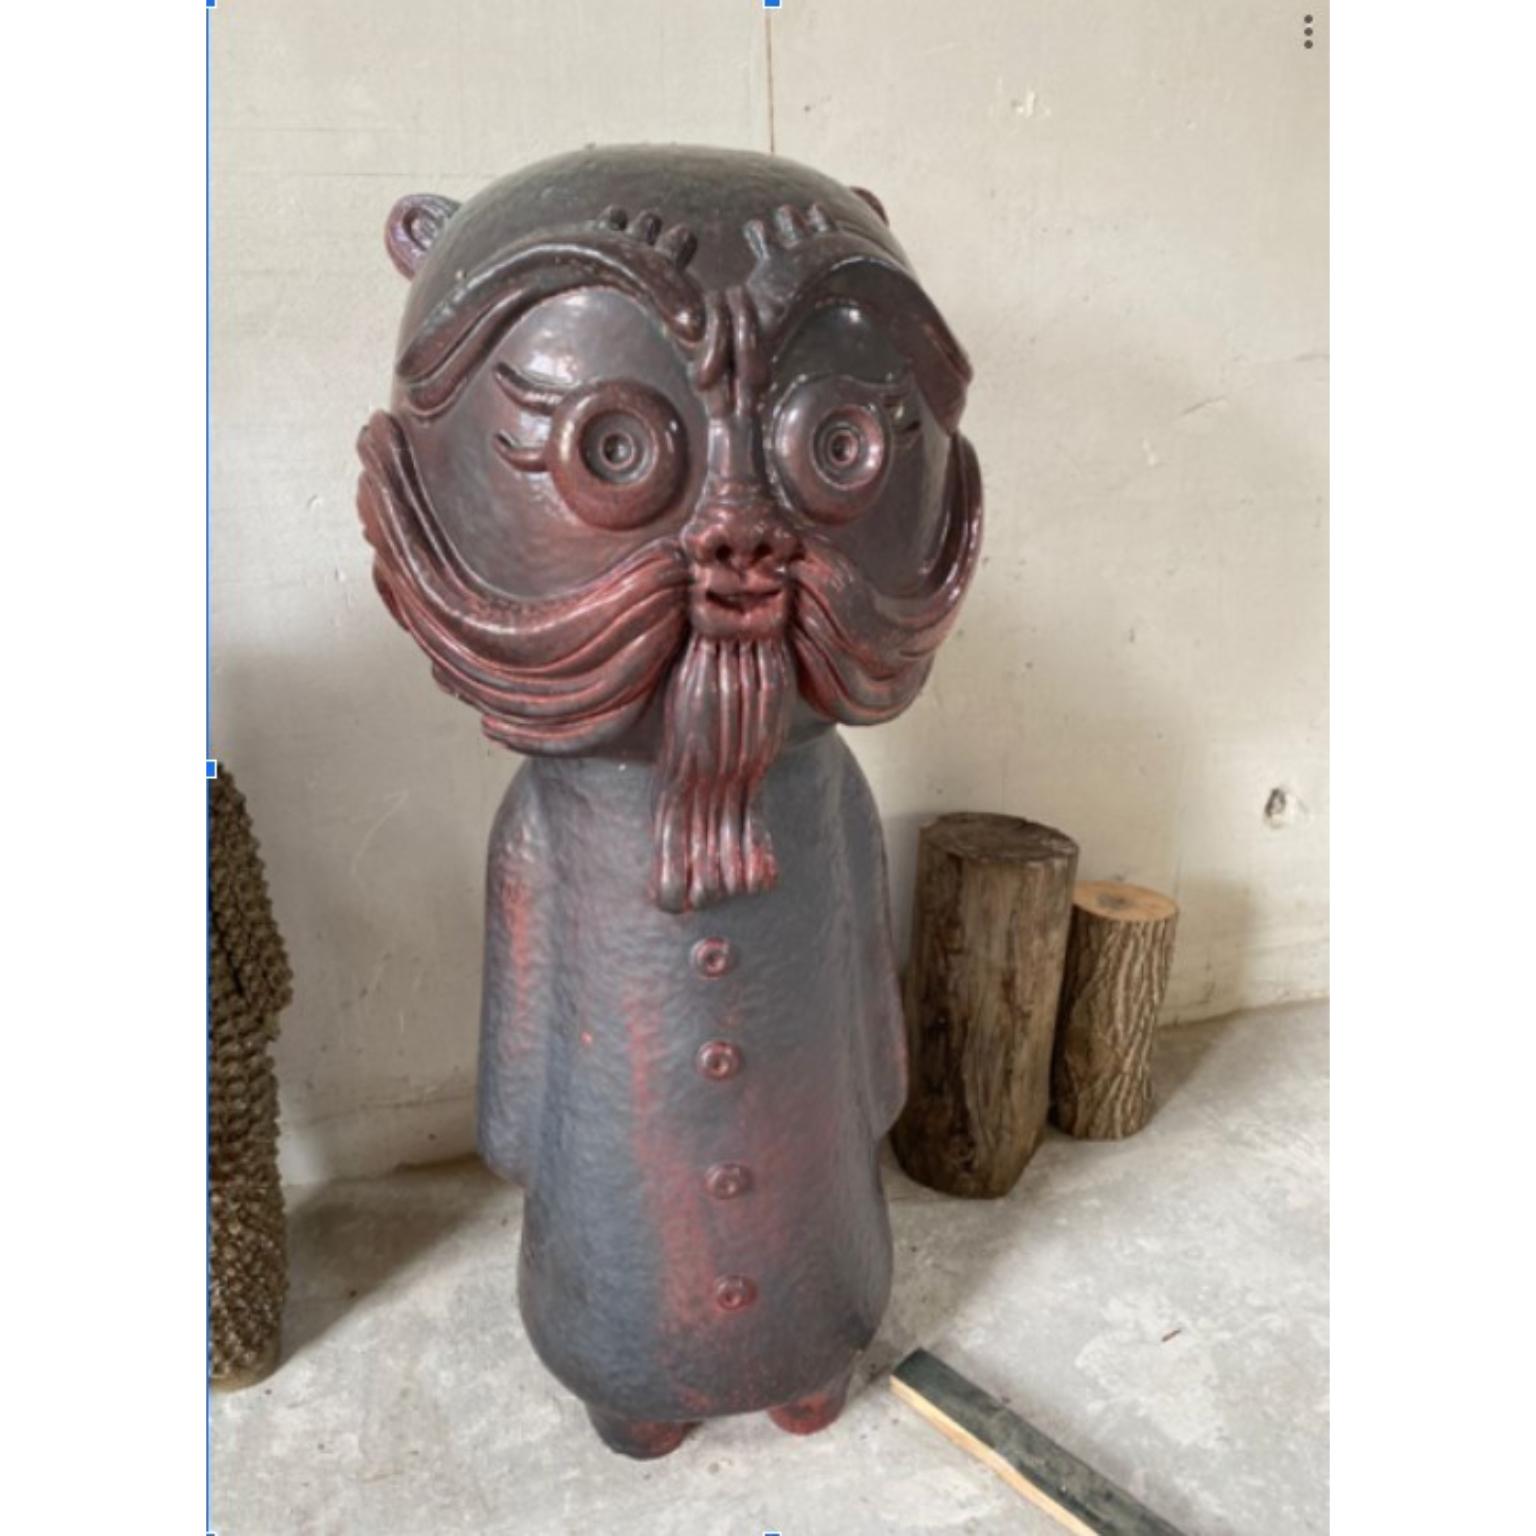 Large Dido ceramic sculpture by Makhno
Dimensions: W 54 x D 70 x H 120 cm
Materials: Ceramics

Makhno Studio is a workshop of modern Ukrainian design and architecture. We work in Ukrainian contemporary style. According to international experts,